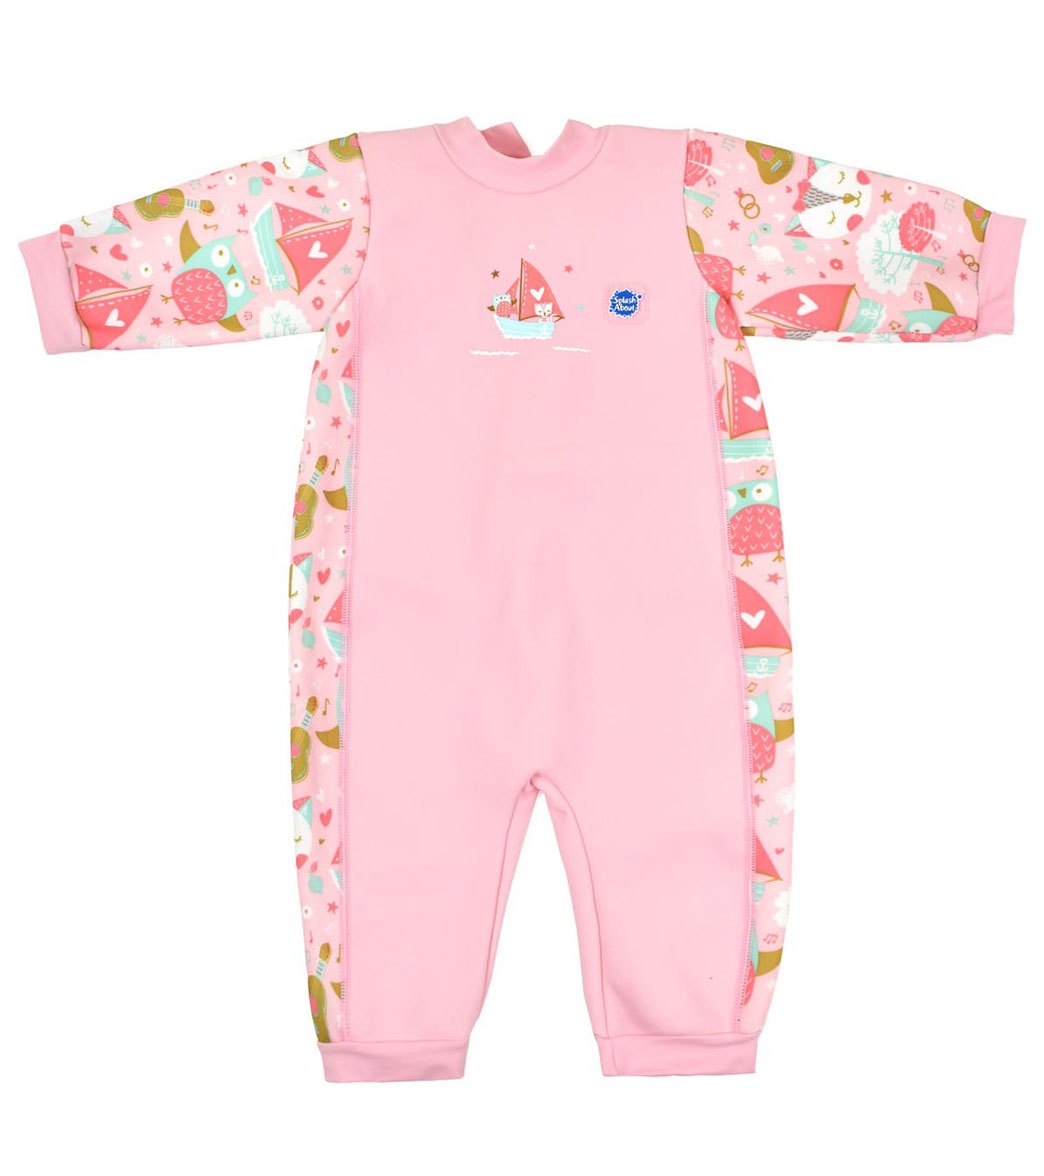 Splash About Girl's Floatsuit Dragonfly 4-6 Years